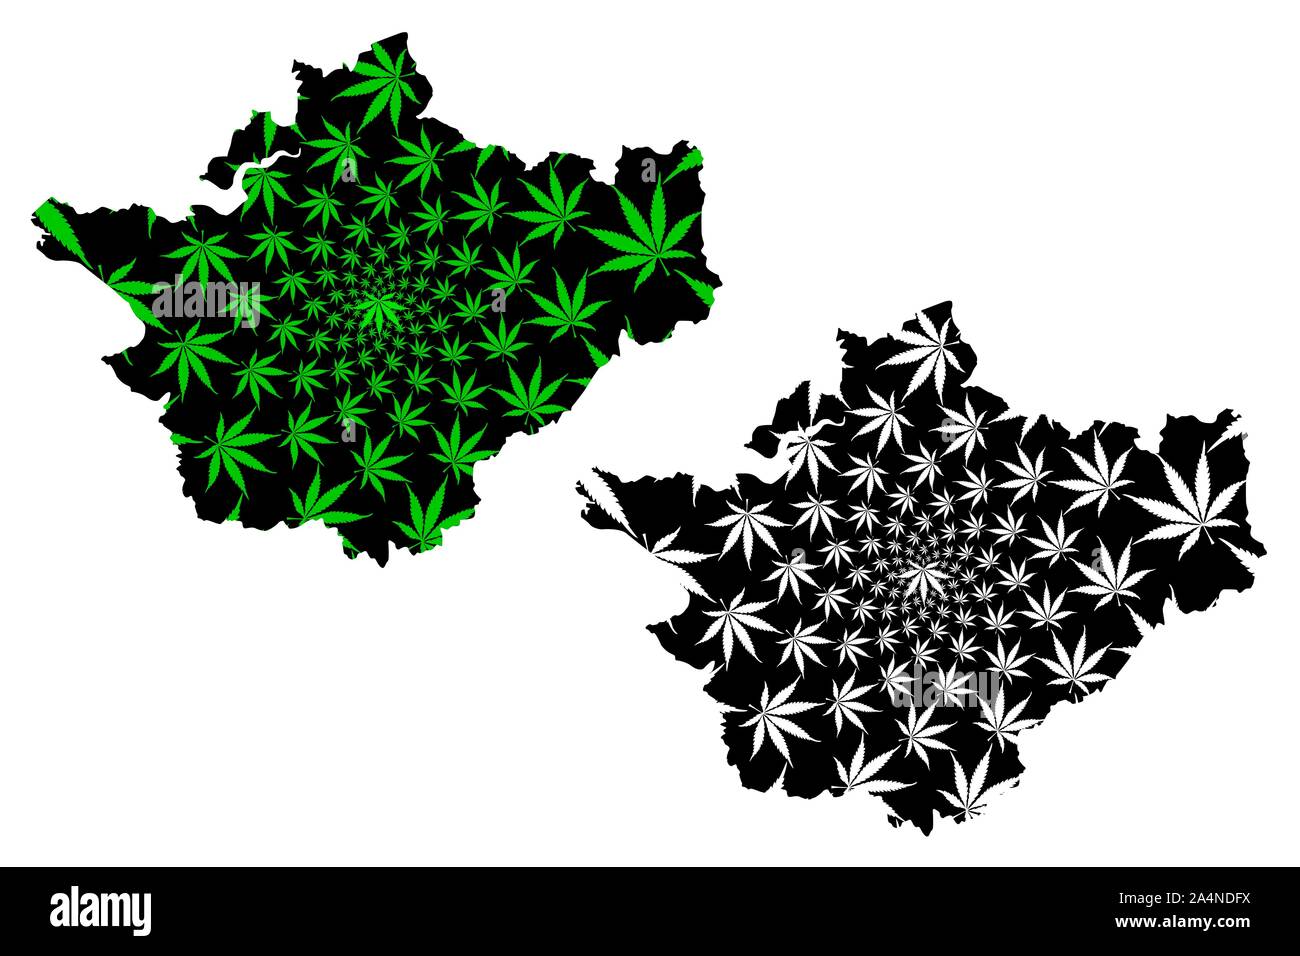 Cheshire (United Kingdom, England, Non-metropolitan county, shire county) map is designed cannabis leaf green and black, County Palatine of Chester ma Stock Vector